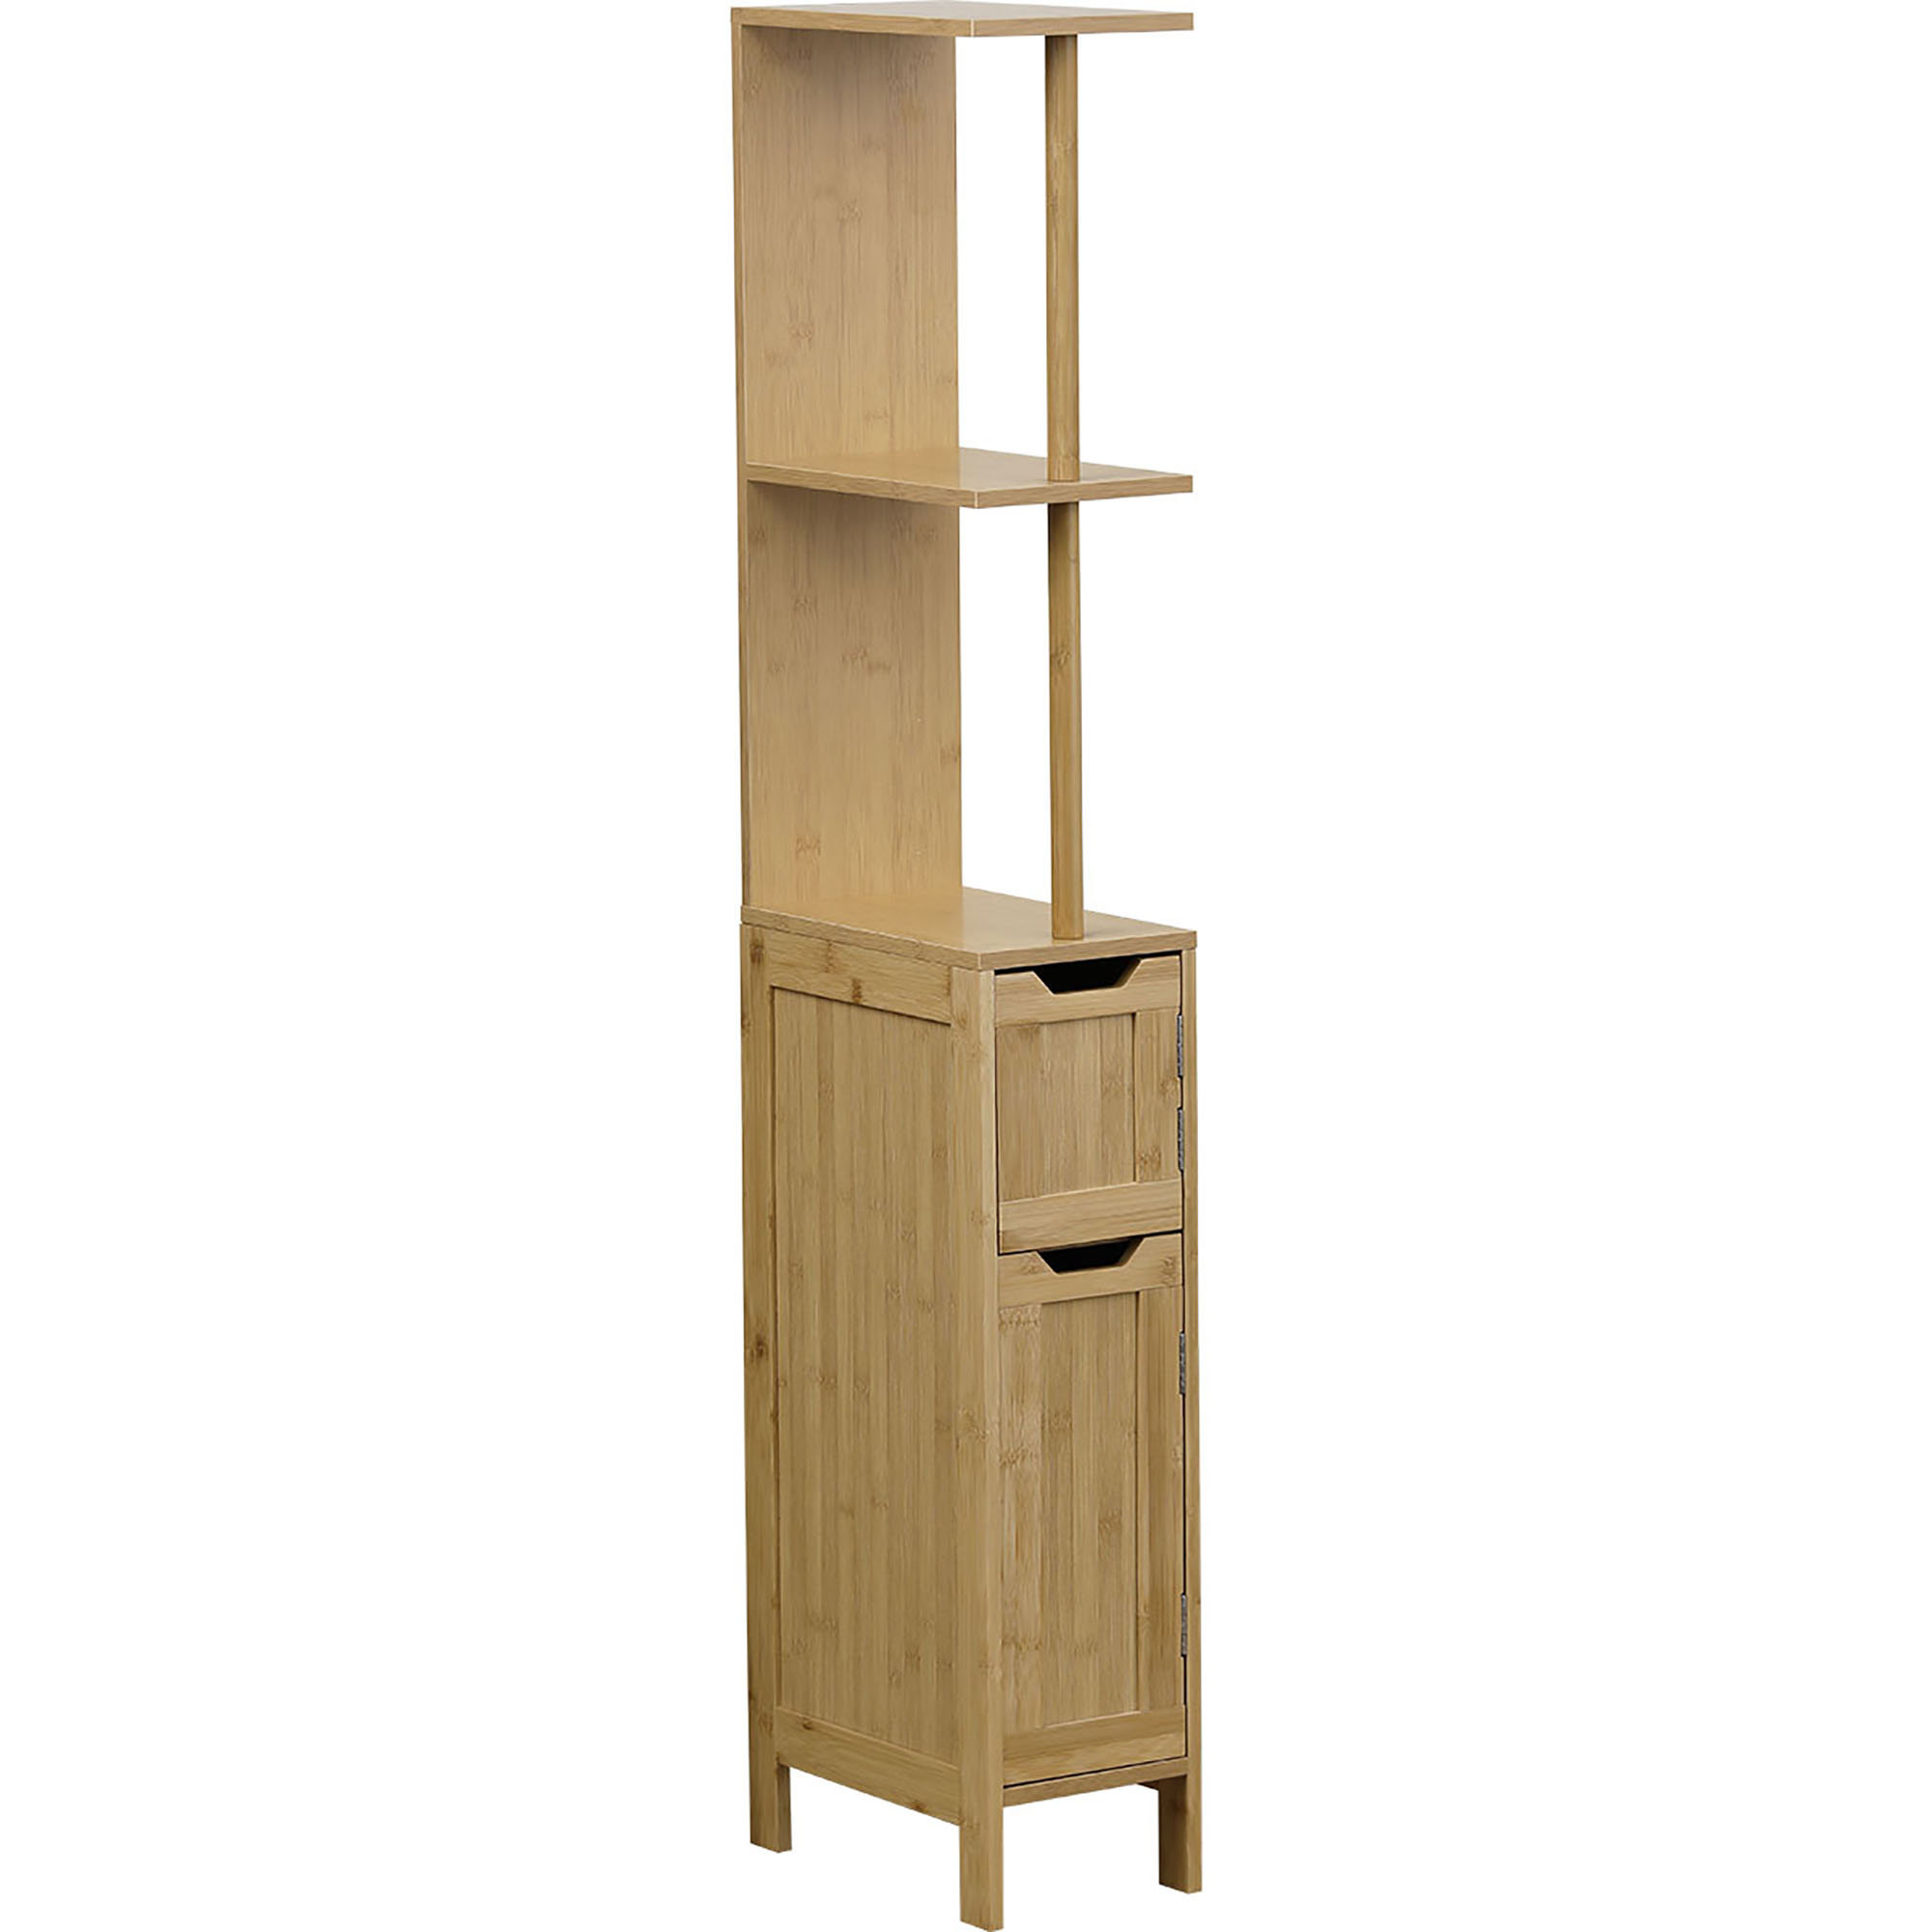 The Toilet Storage Cabinet Rack, Bamboo Bathroom Space Saver Laundry Room  Corner Stand, Organizer Shelf for Restroom, Natural - AliExpress